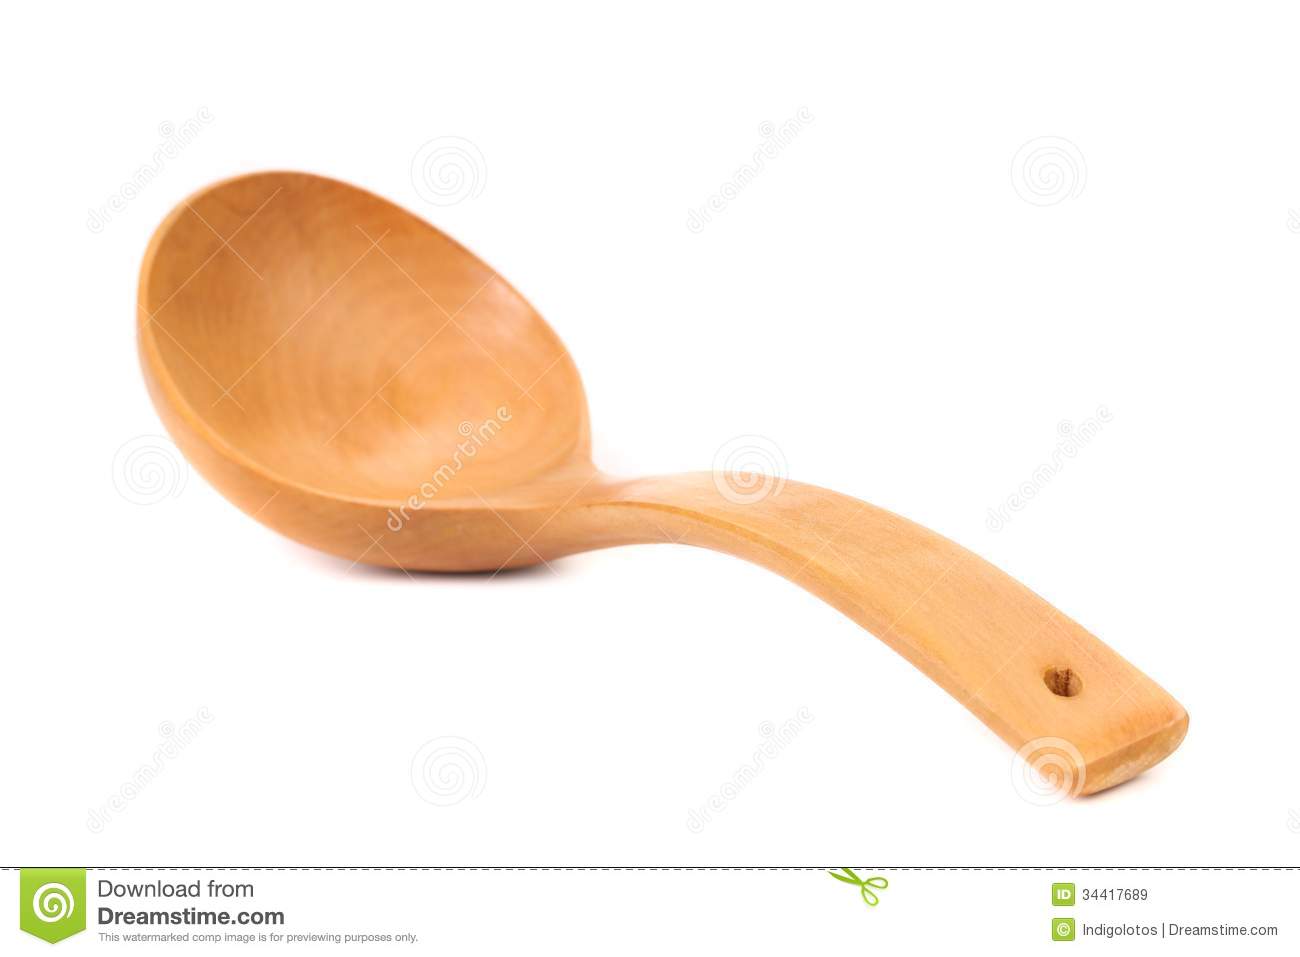 Wooden Spoon Isolated On White Background Royalty Free Stock Images